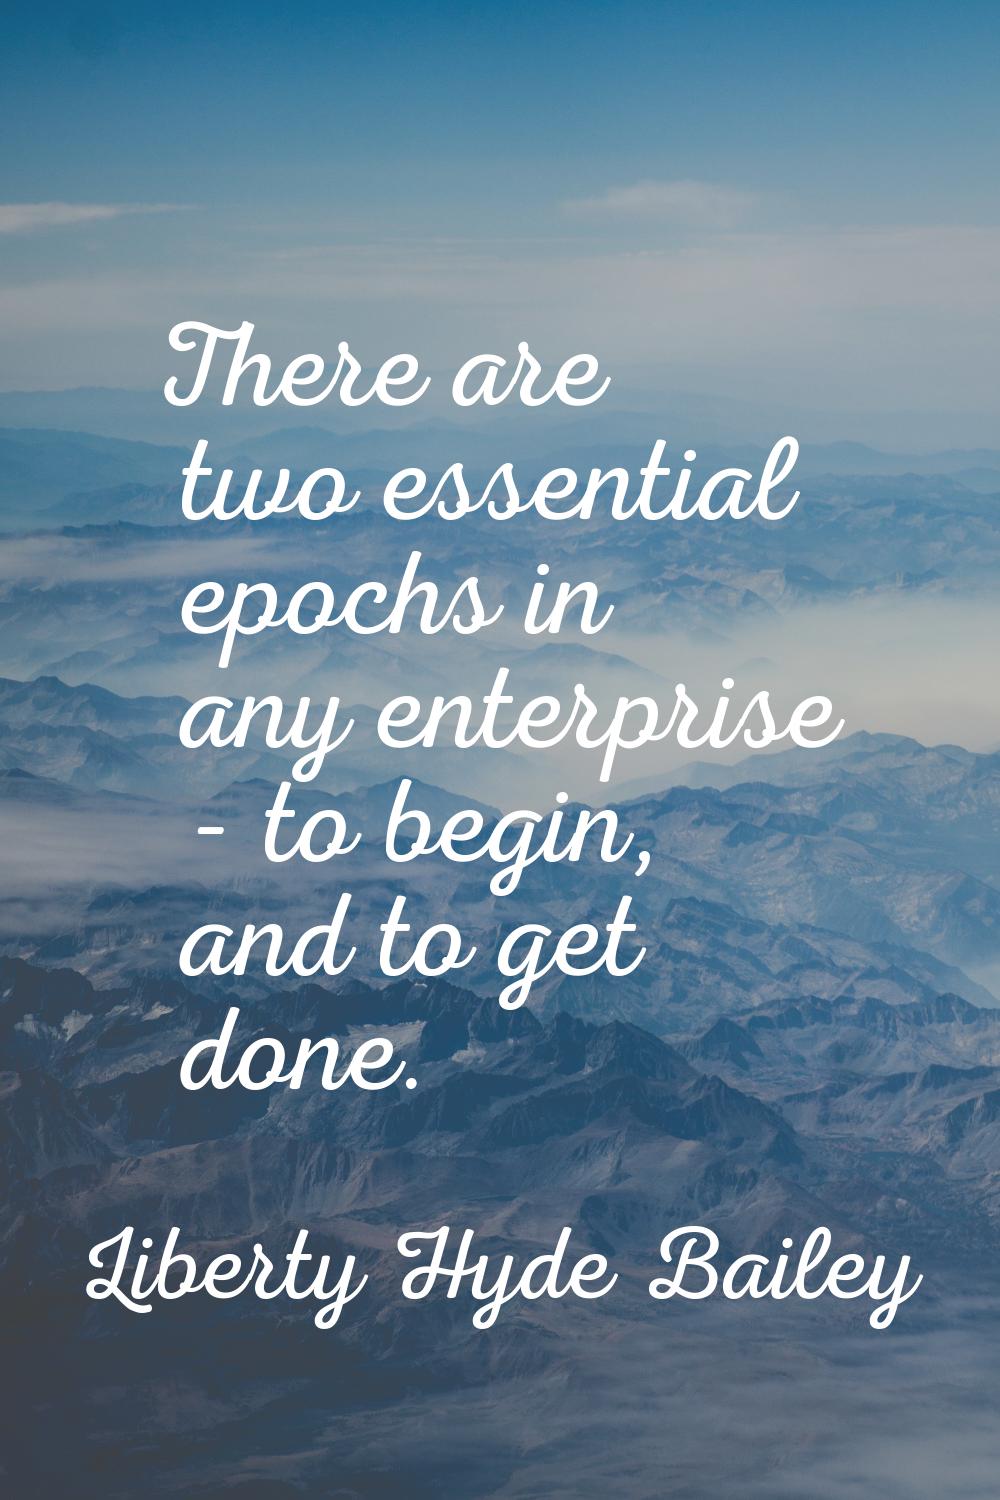 There are two essential epochs in any enterprise - to begin, and to get done.